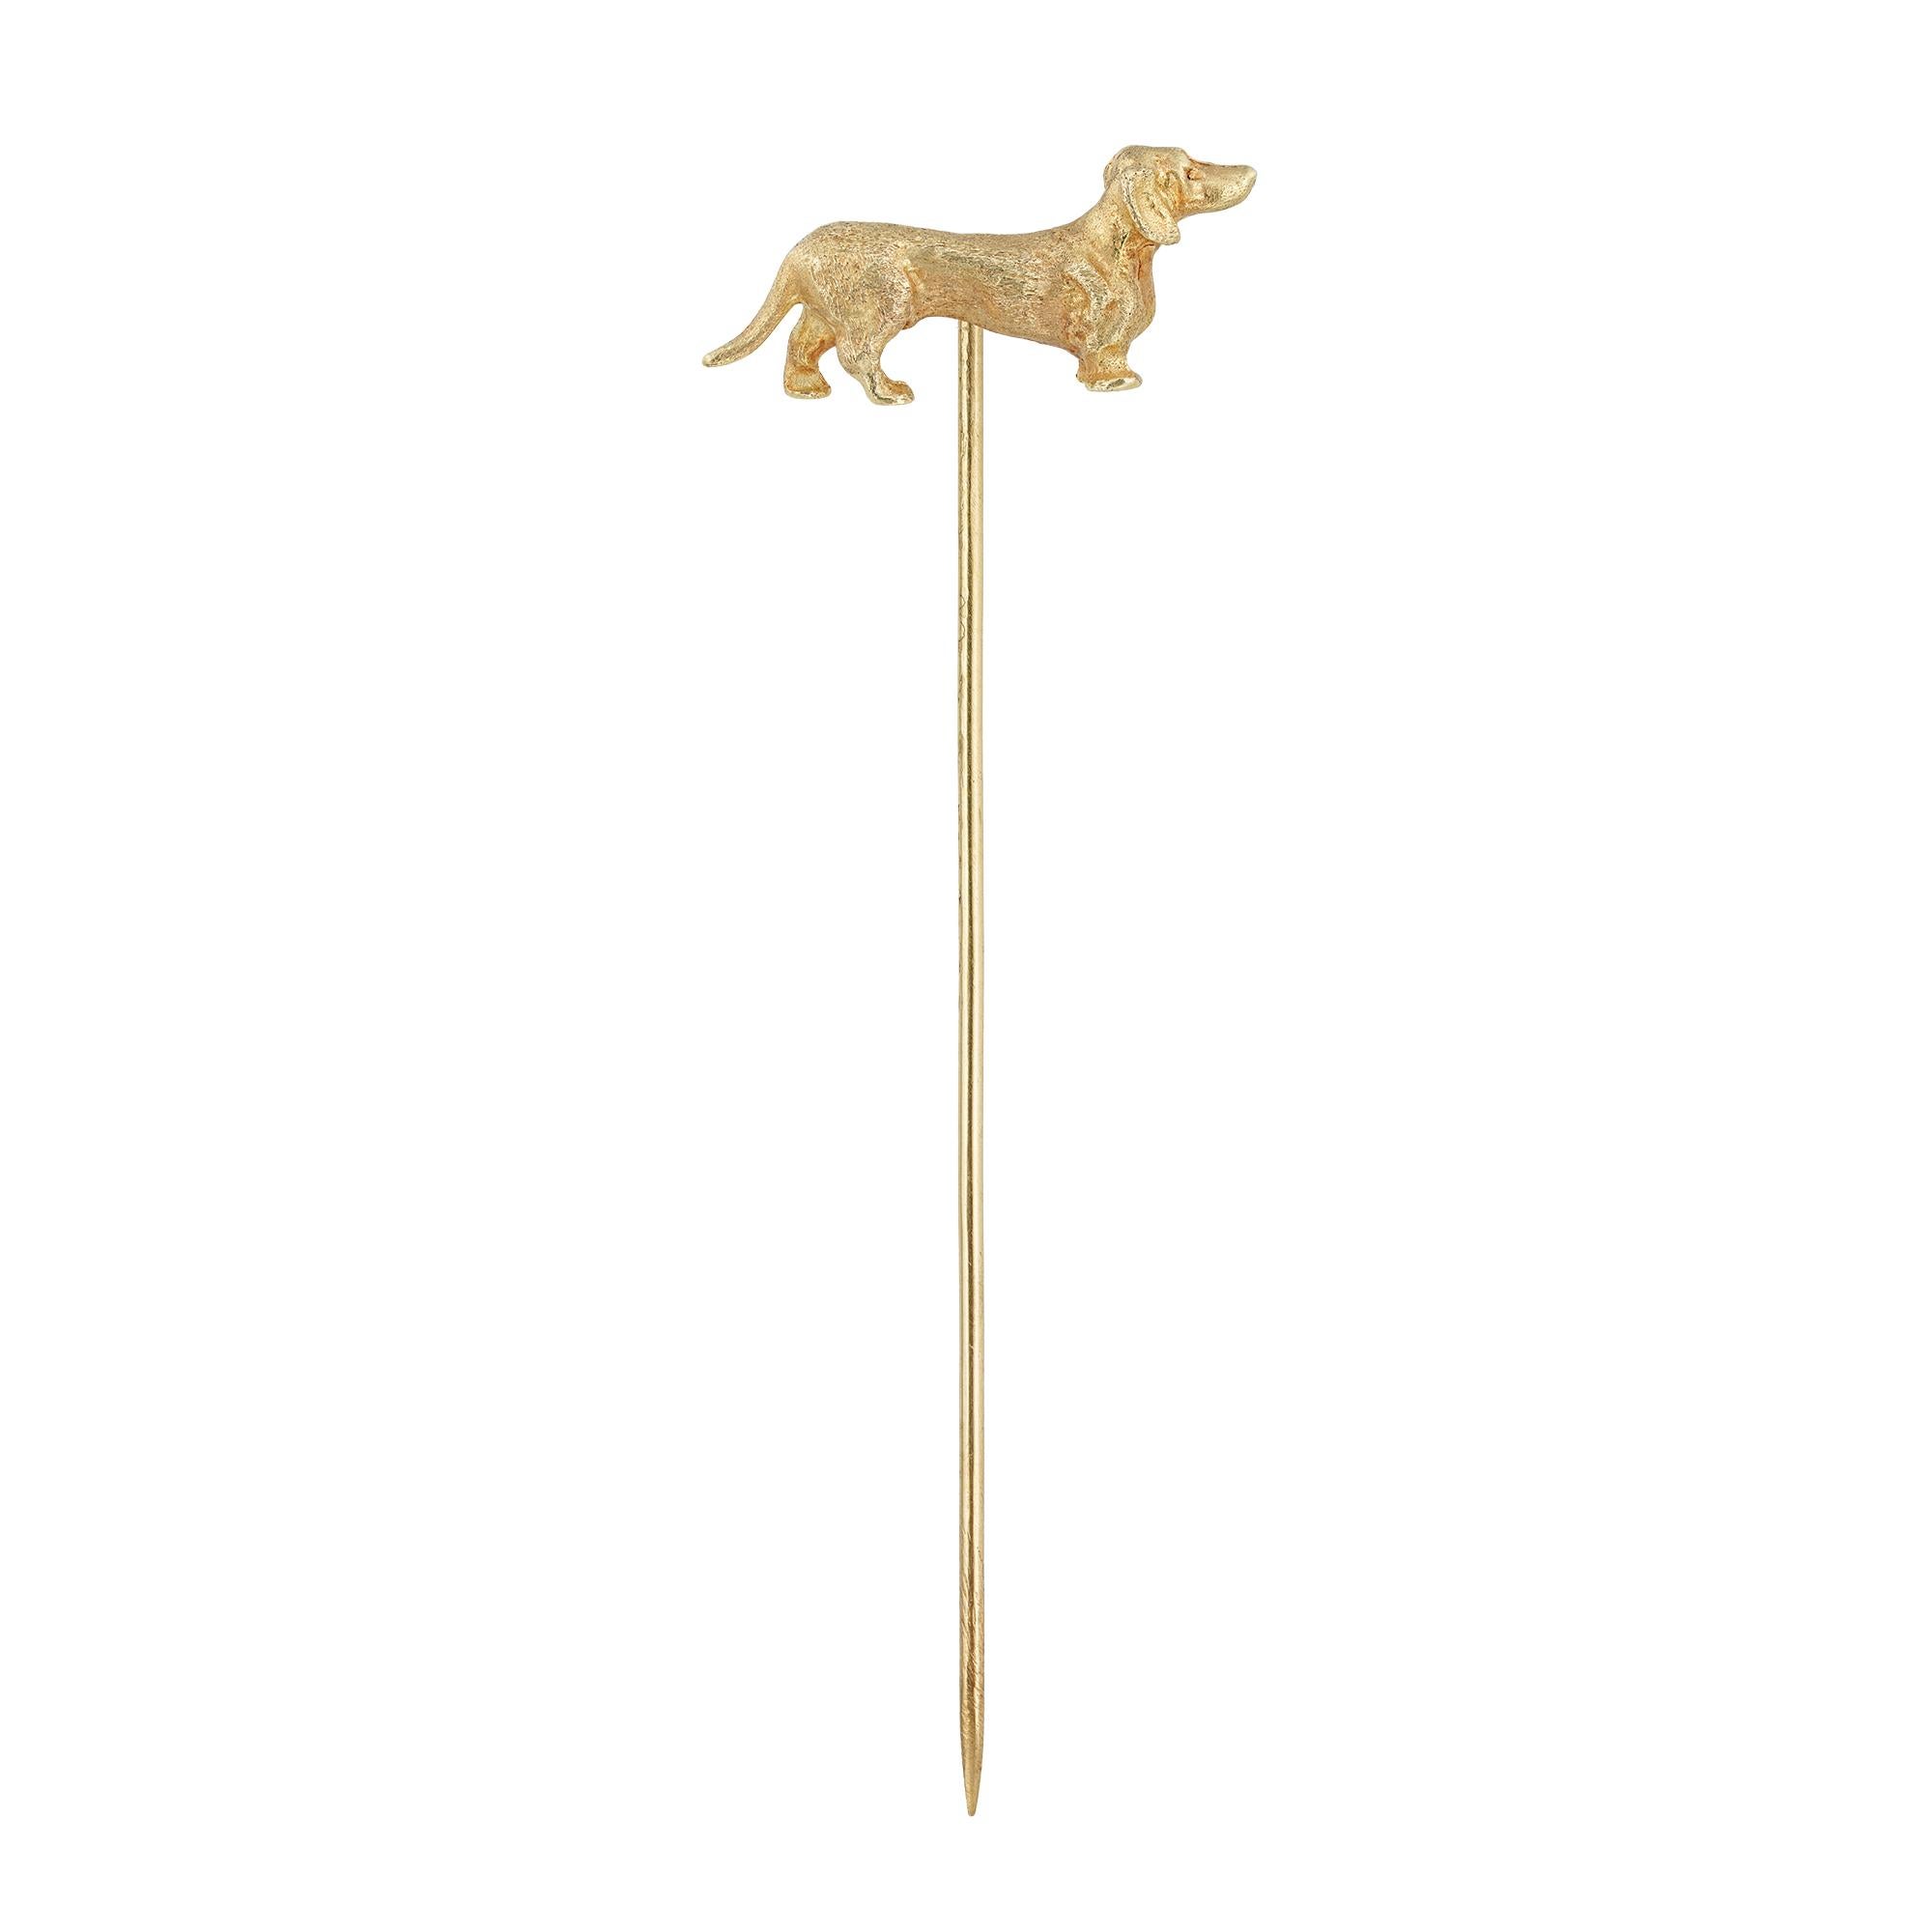 A late Victorian dachshund stick-pin, the realistically carved dog made in yellow gold, with gold pin fitting, circa 1900, unmarked, tested as 14ct gold with 18ct gold pin, measuring 2.1 x 1cm, the pin measuring 6.5cm long, gross weight